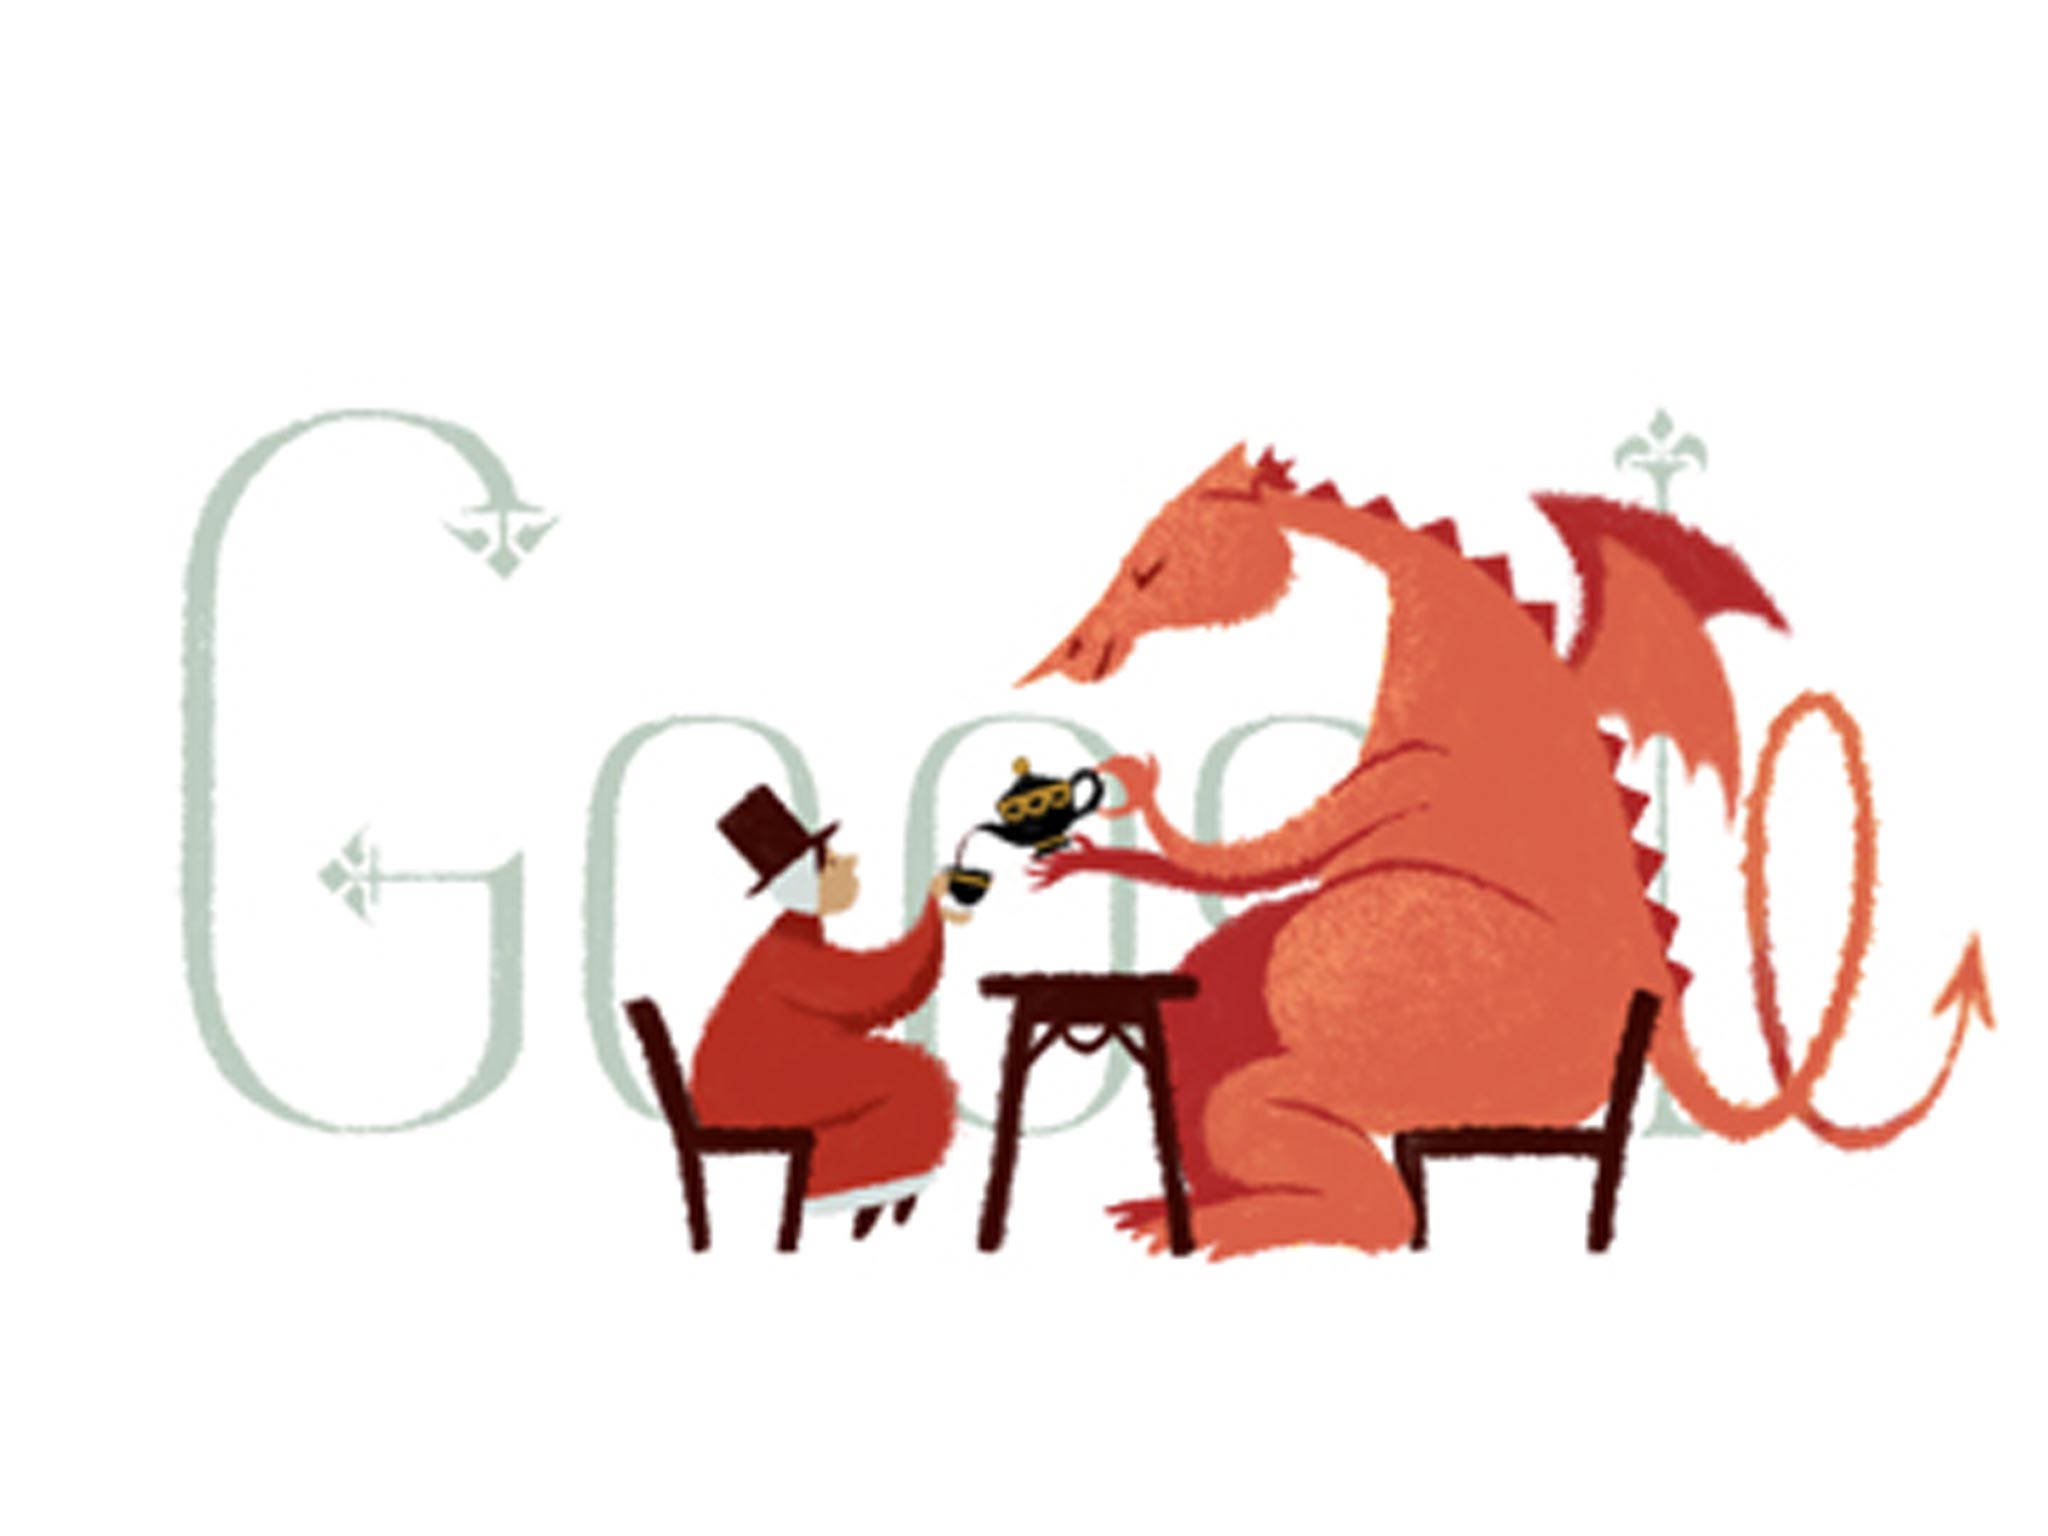 The Welsh dragon pours a cup of tea for a little lady in traditional dress